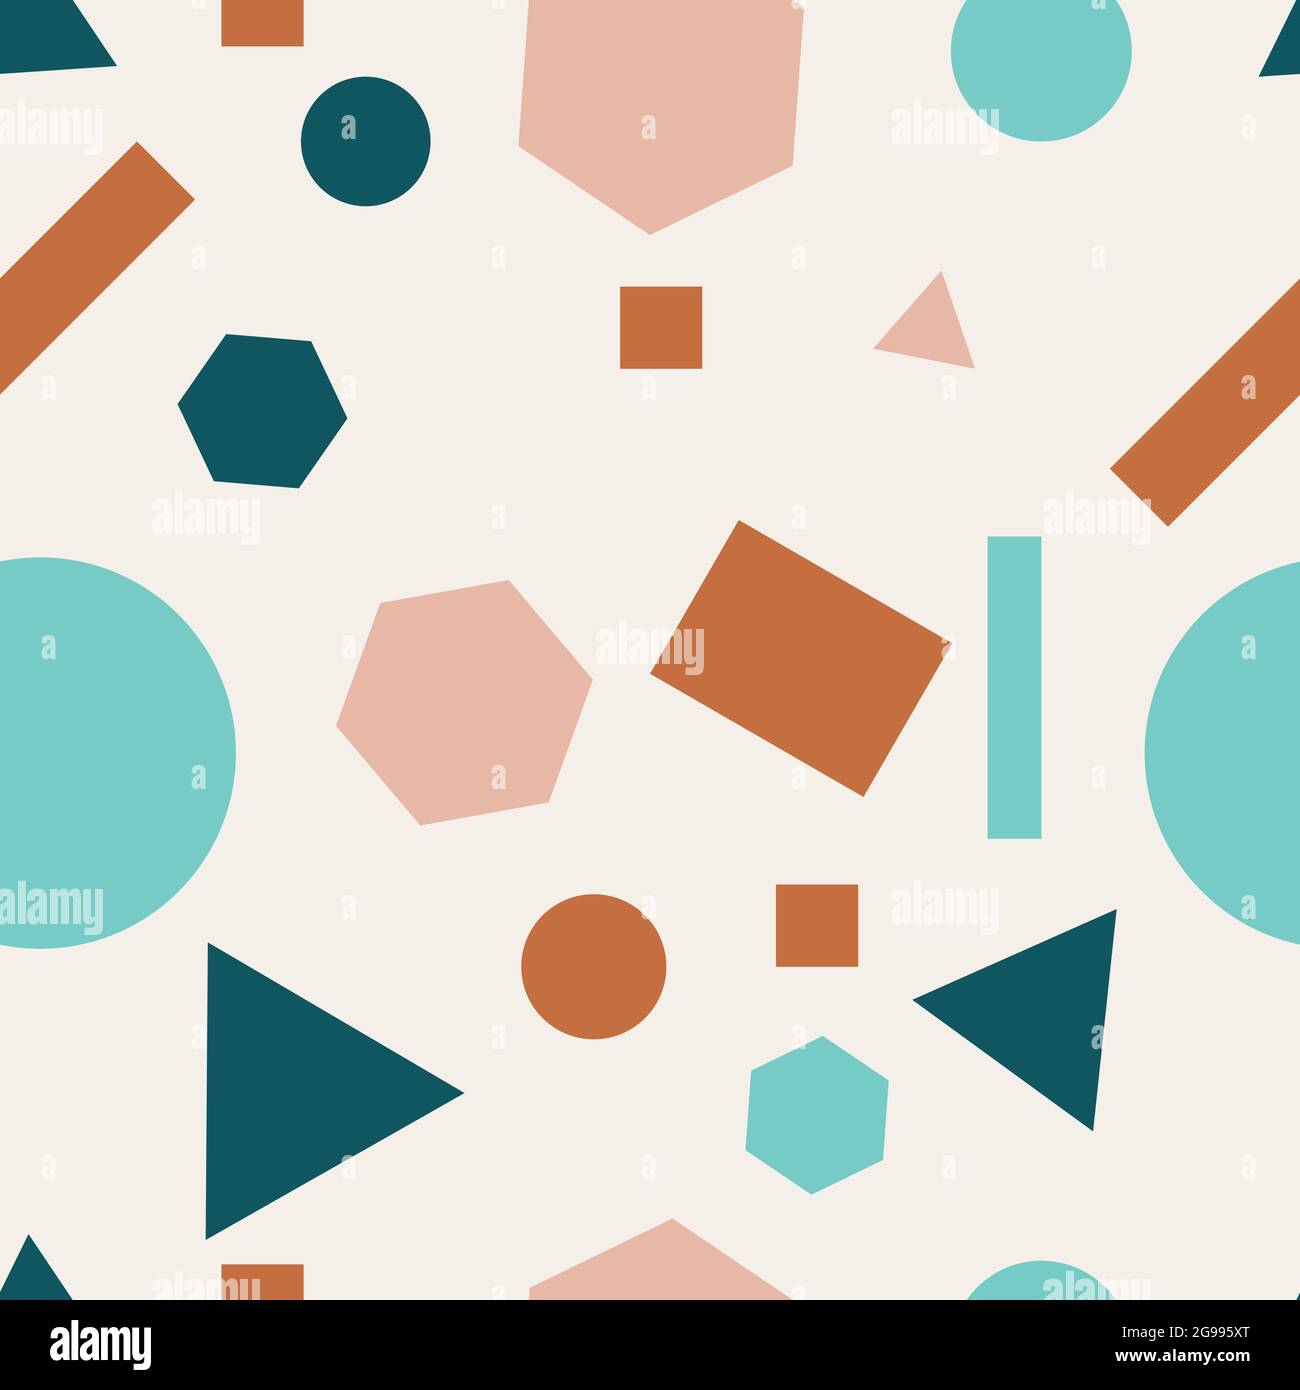 Abstract Geometric Seamless Pattern Vector Stock Vector